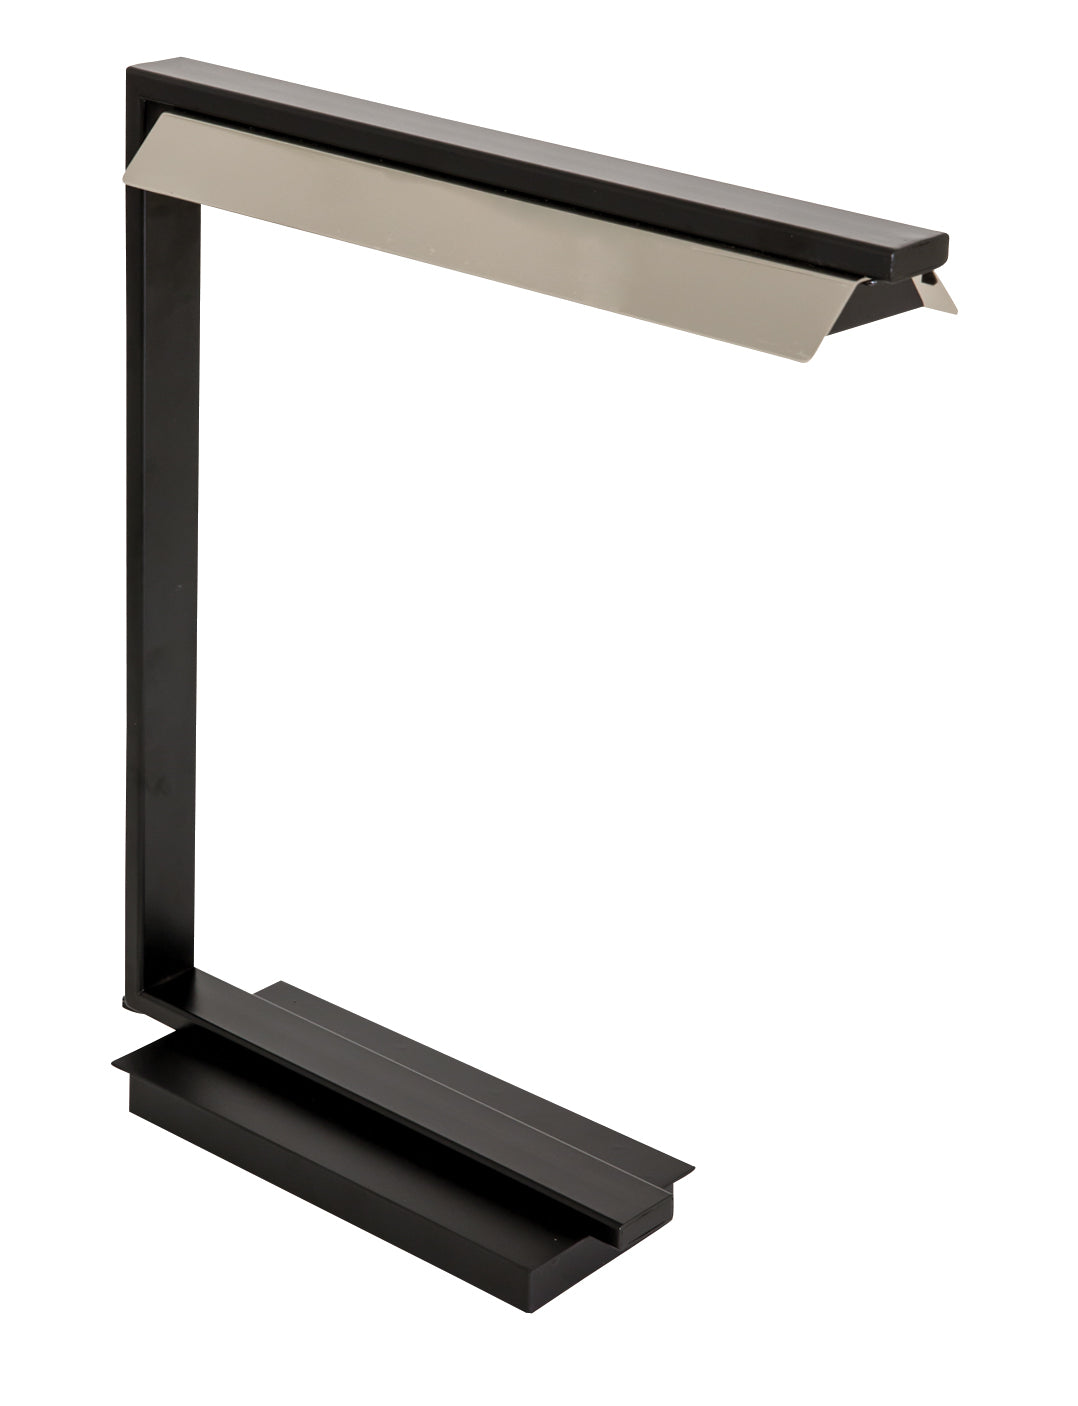 House of Troy 19" Jay LED Table Lamp in Black with Polished Nickel JLED550-BLK